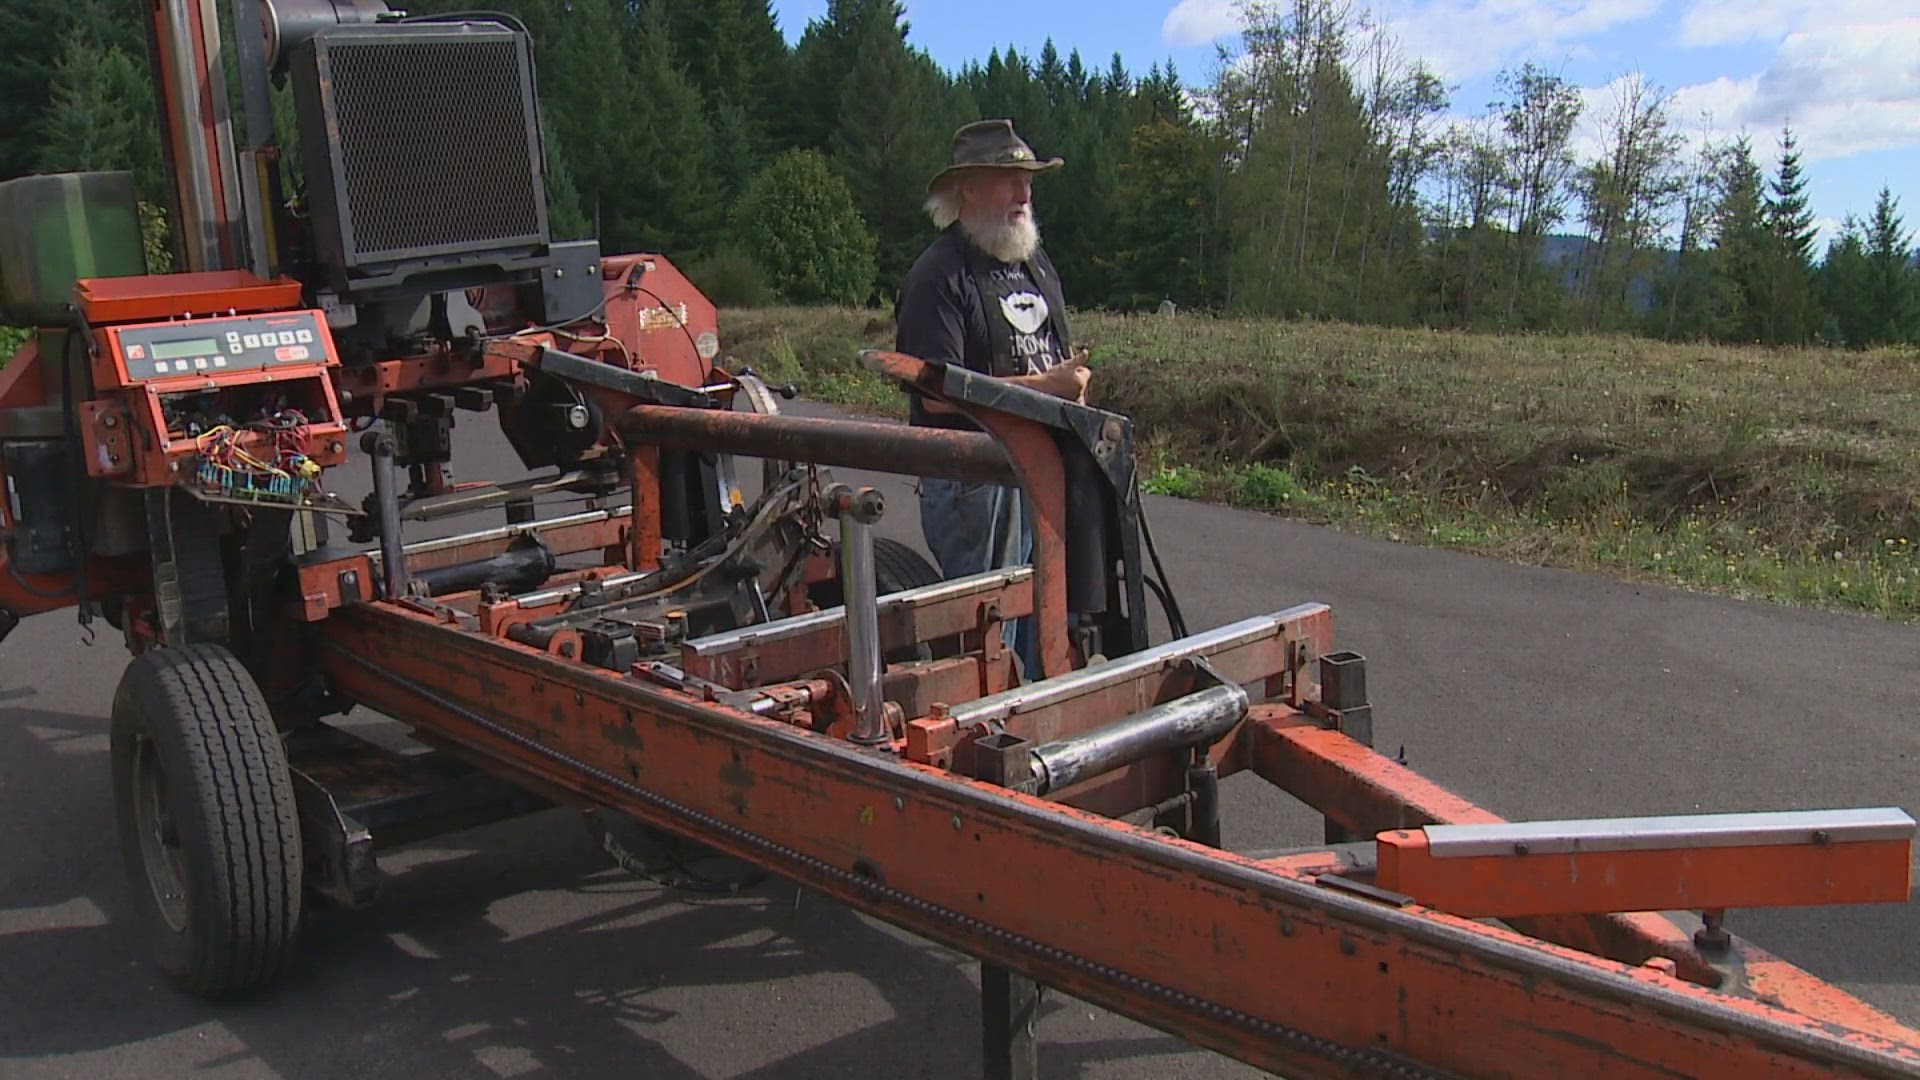 The portable sawmill, which is worth about $85,000, was stolen from Tumwater work site in August.